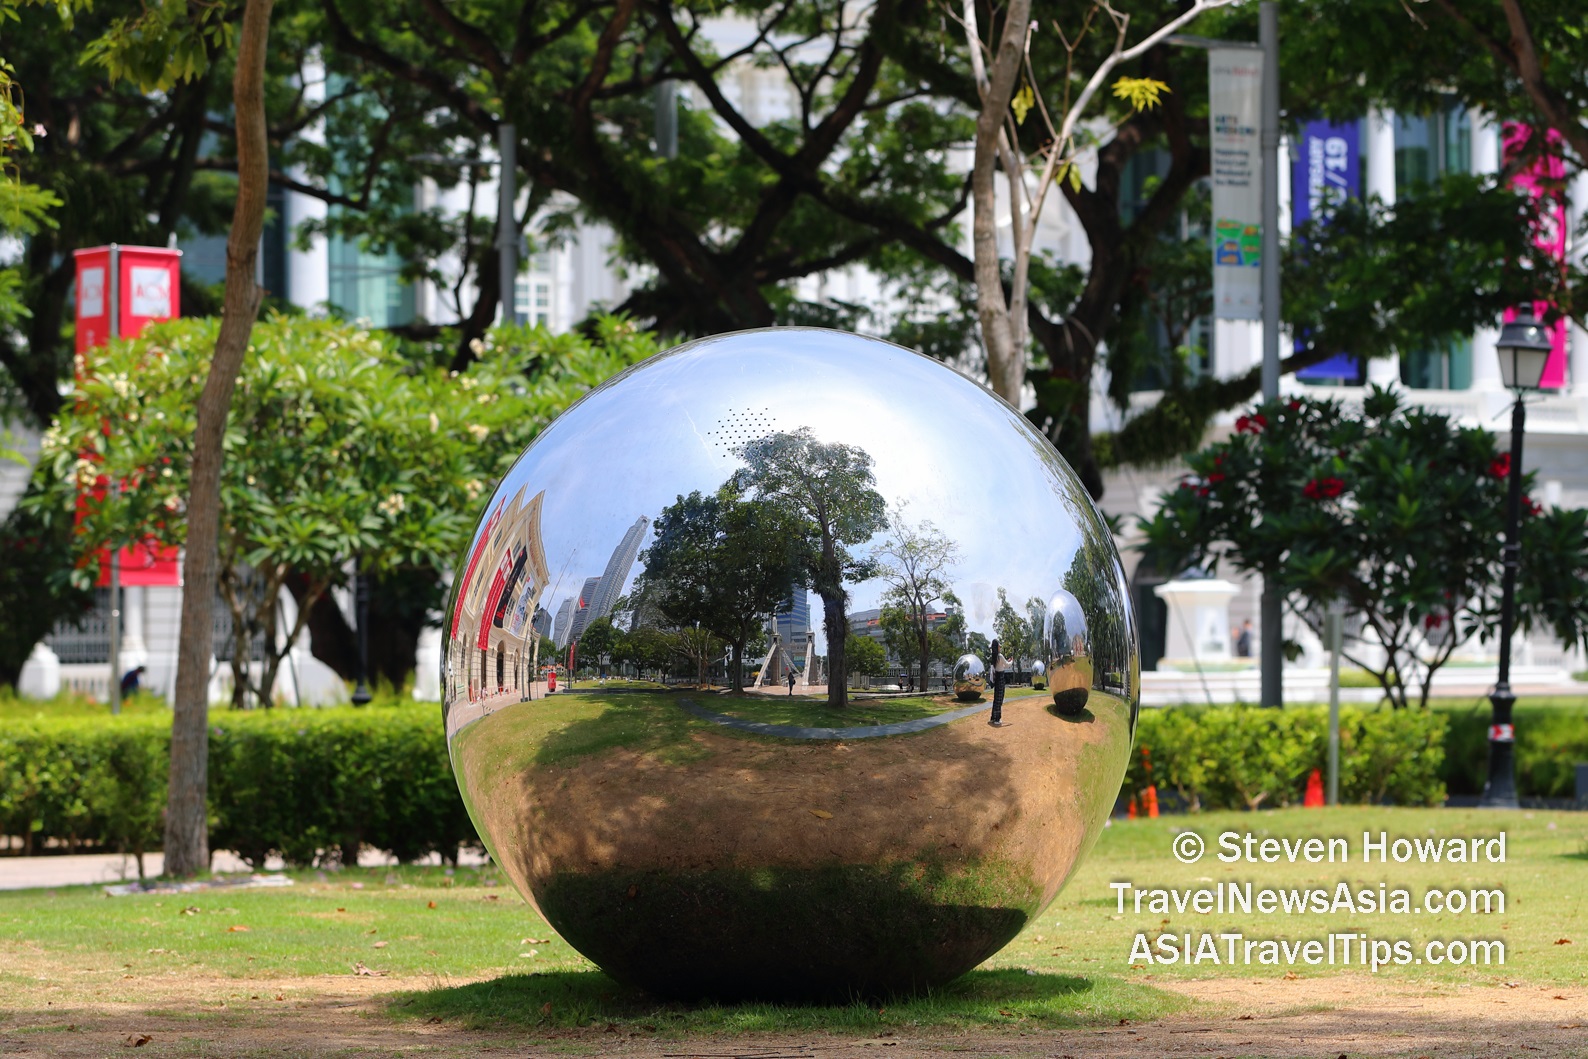 Large reflective balls on the grass outside the Museum of Ancient Civilisations in Singapore, one of the world's most dynamic cities. Picture by Steven Howard of TravelNewsAsia.com Click to enlarge.